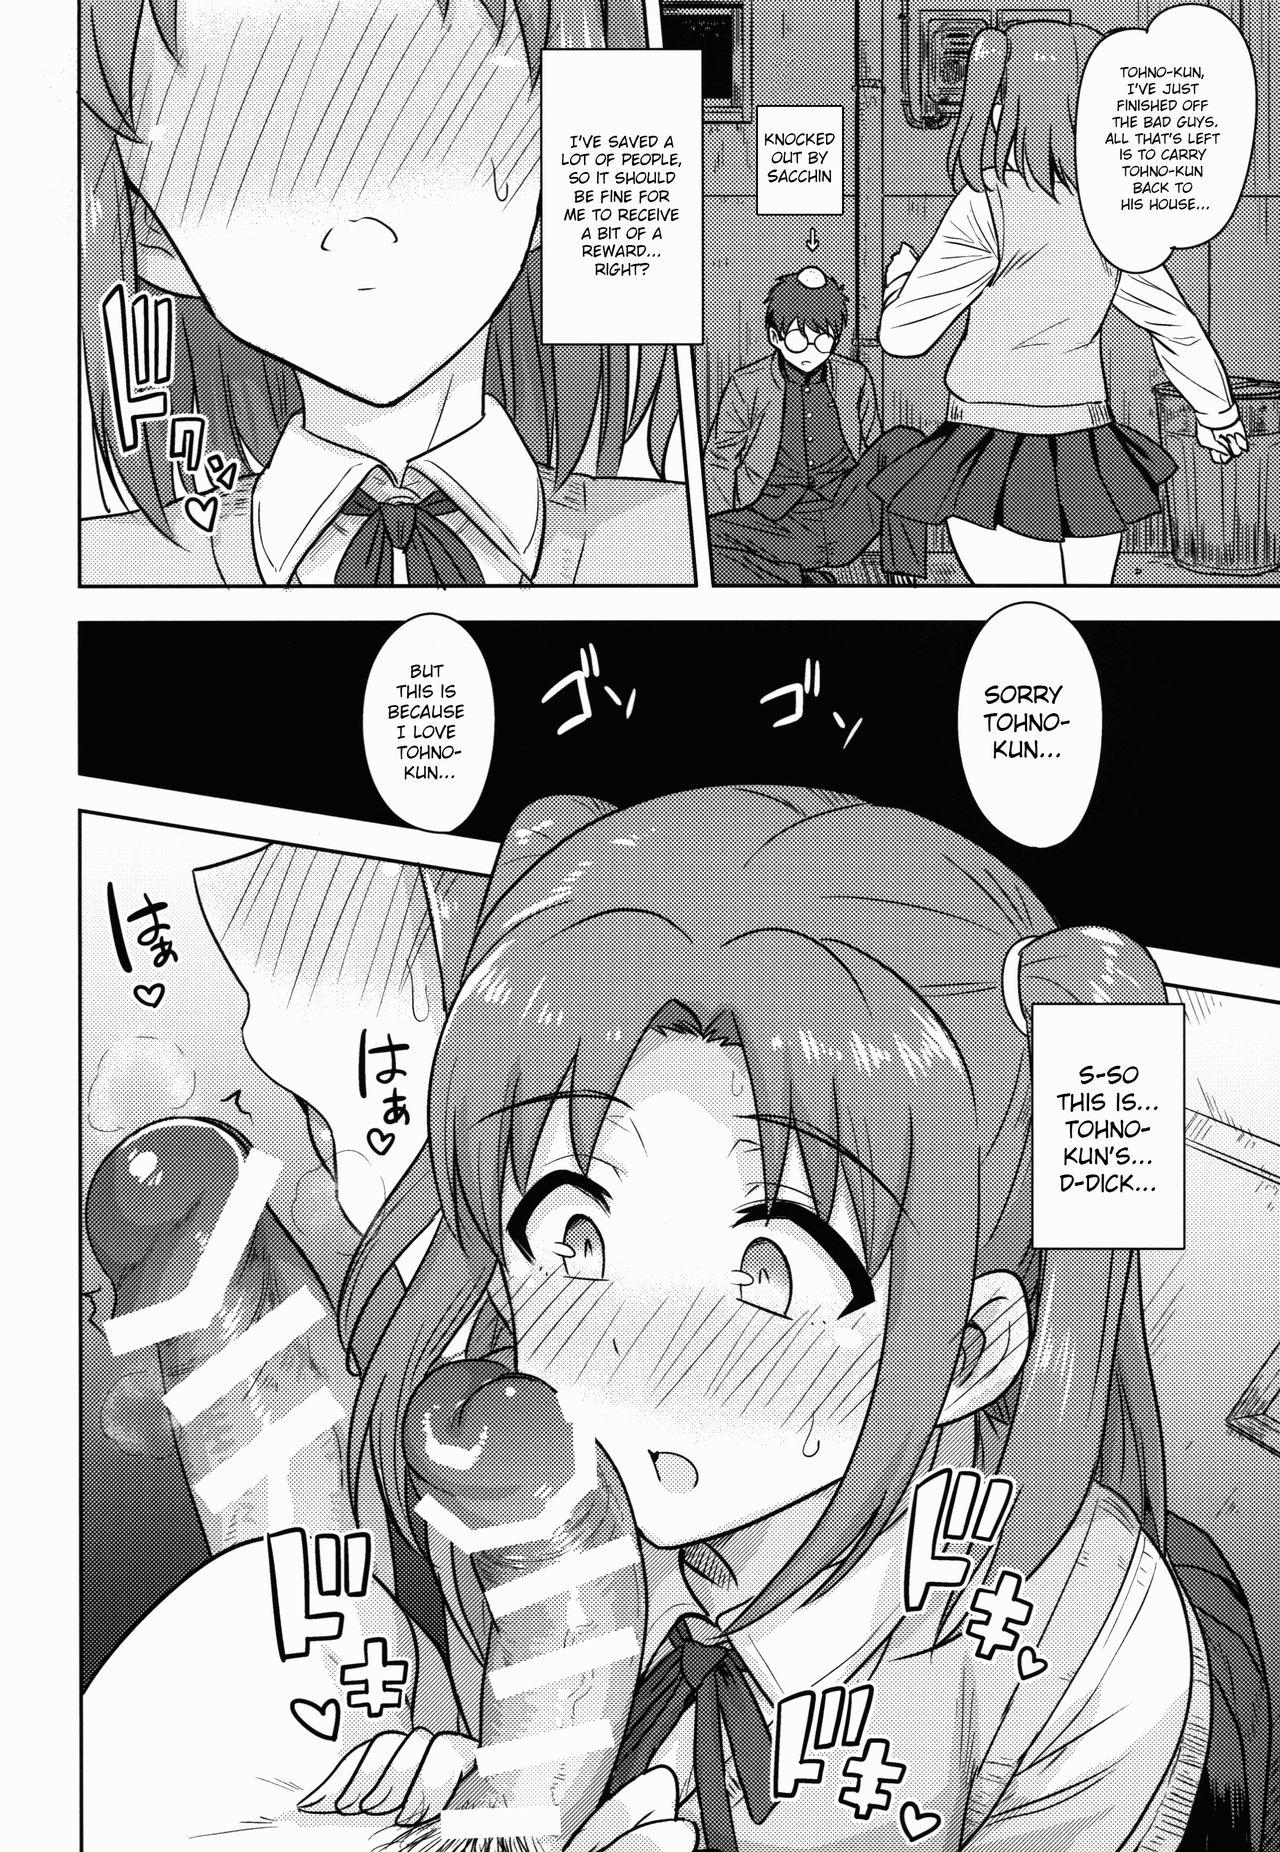 Teenie Aru Hi no Futari MelBlo Hen | A Certain Day with Each Other Melty Blood Hen - Tsukihime Nudity - Page 9